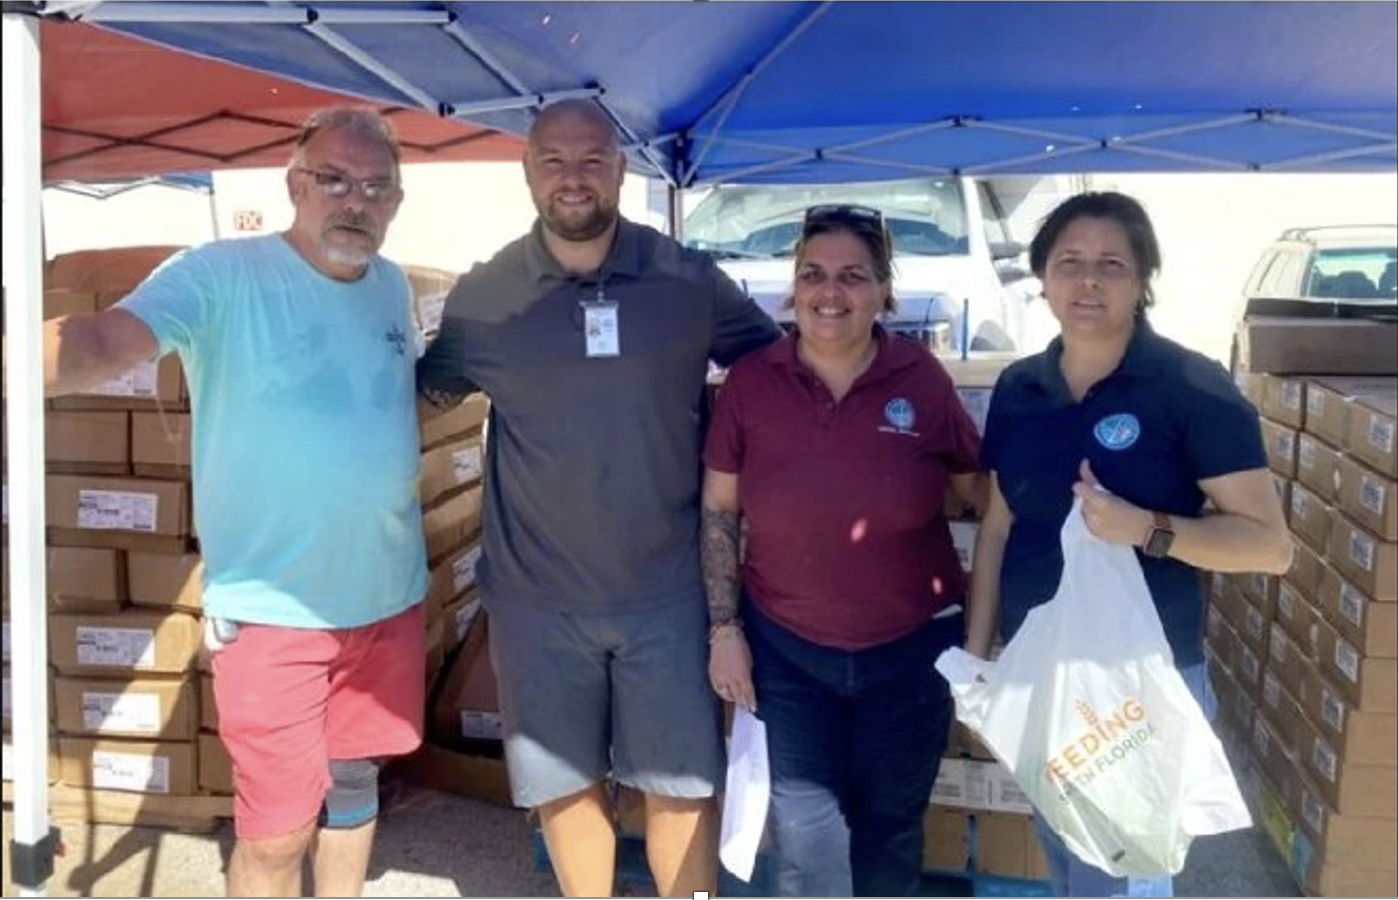 Florida Keys Free Press | Nonprofit, county partner to feed those in need